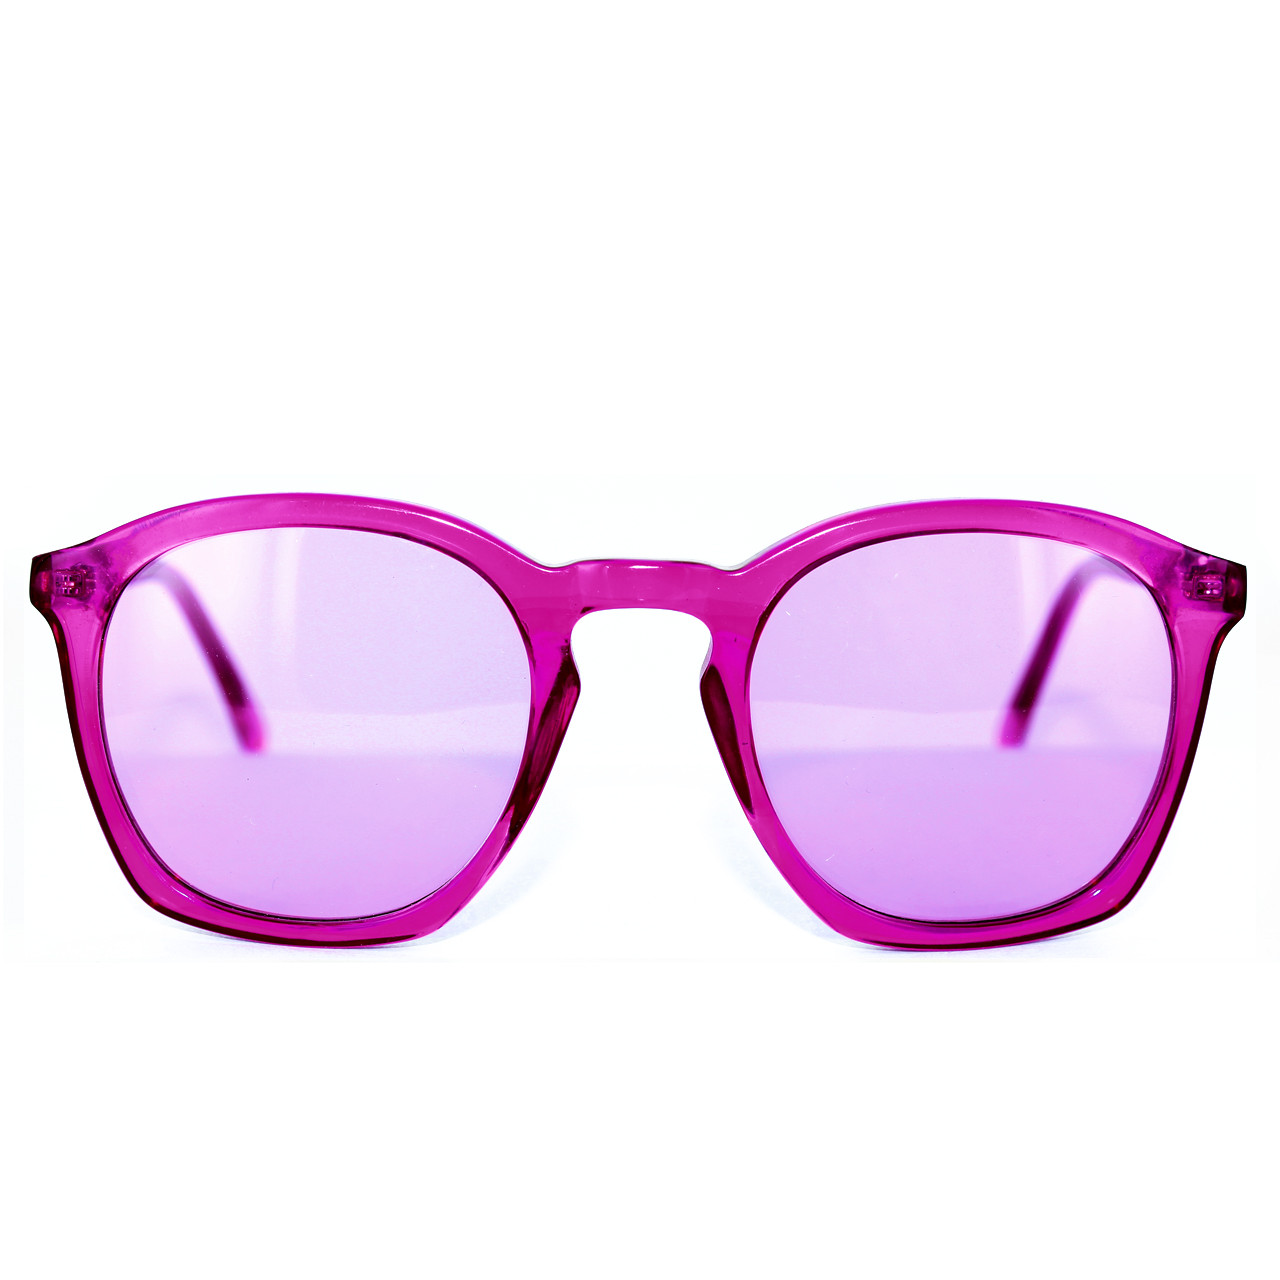 GEEK COUTURE 4 Ultra Violet